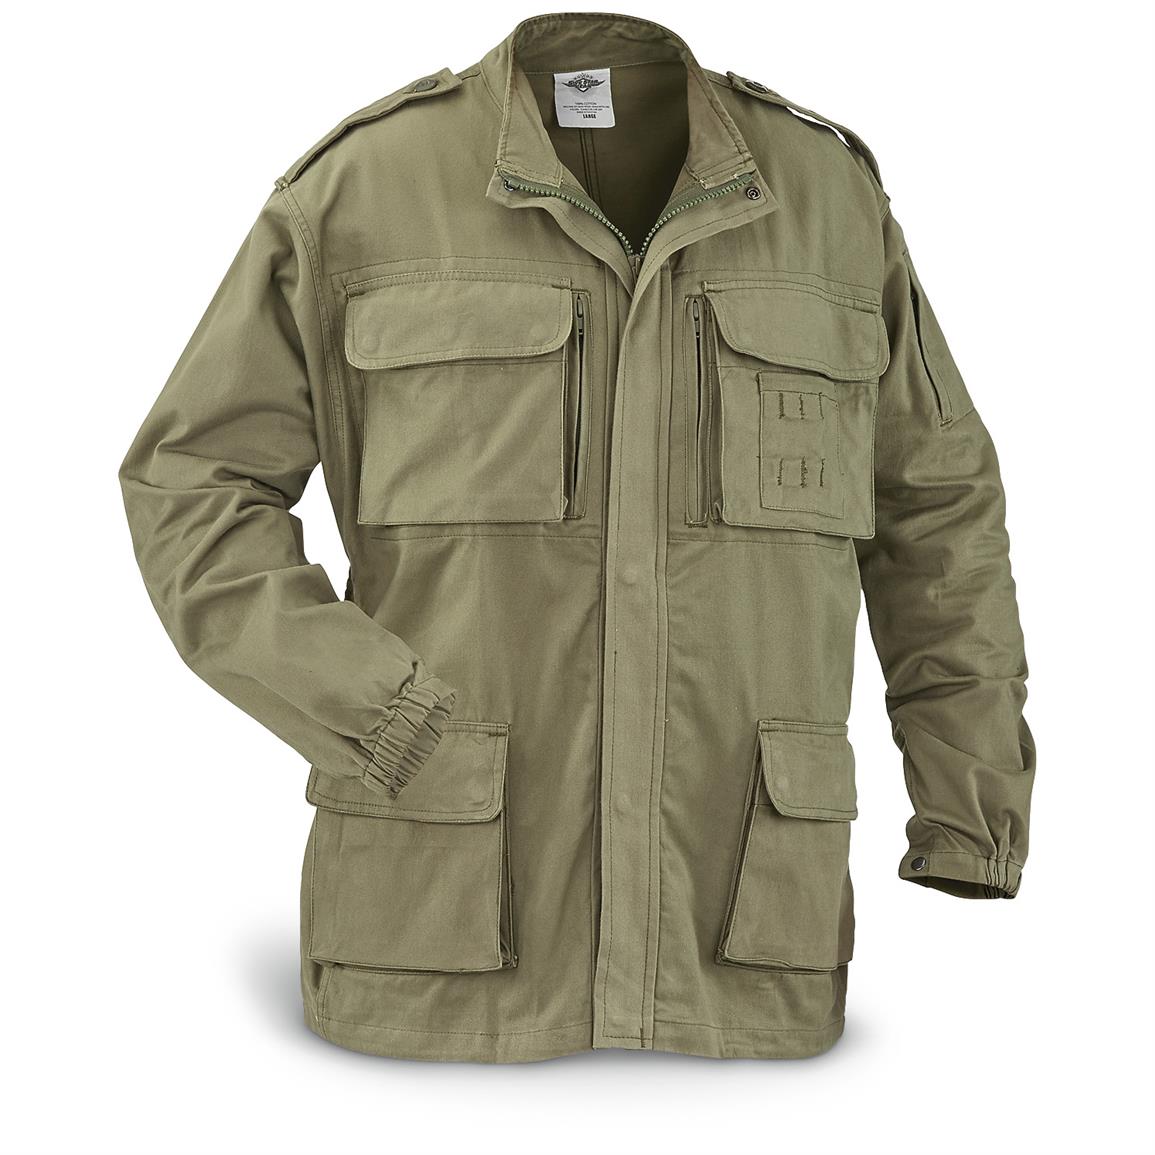 5ive Star Gear Men's Concealed Carry Field Jacket, Stonewashed - 651605 ...